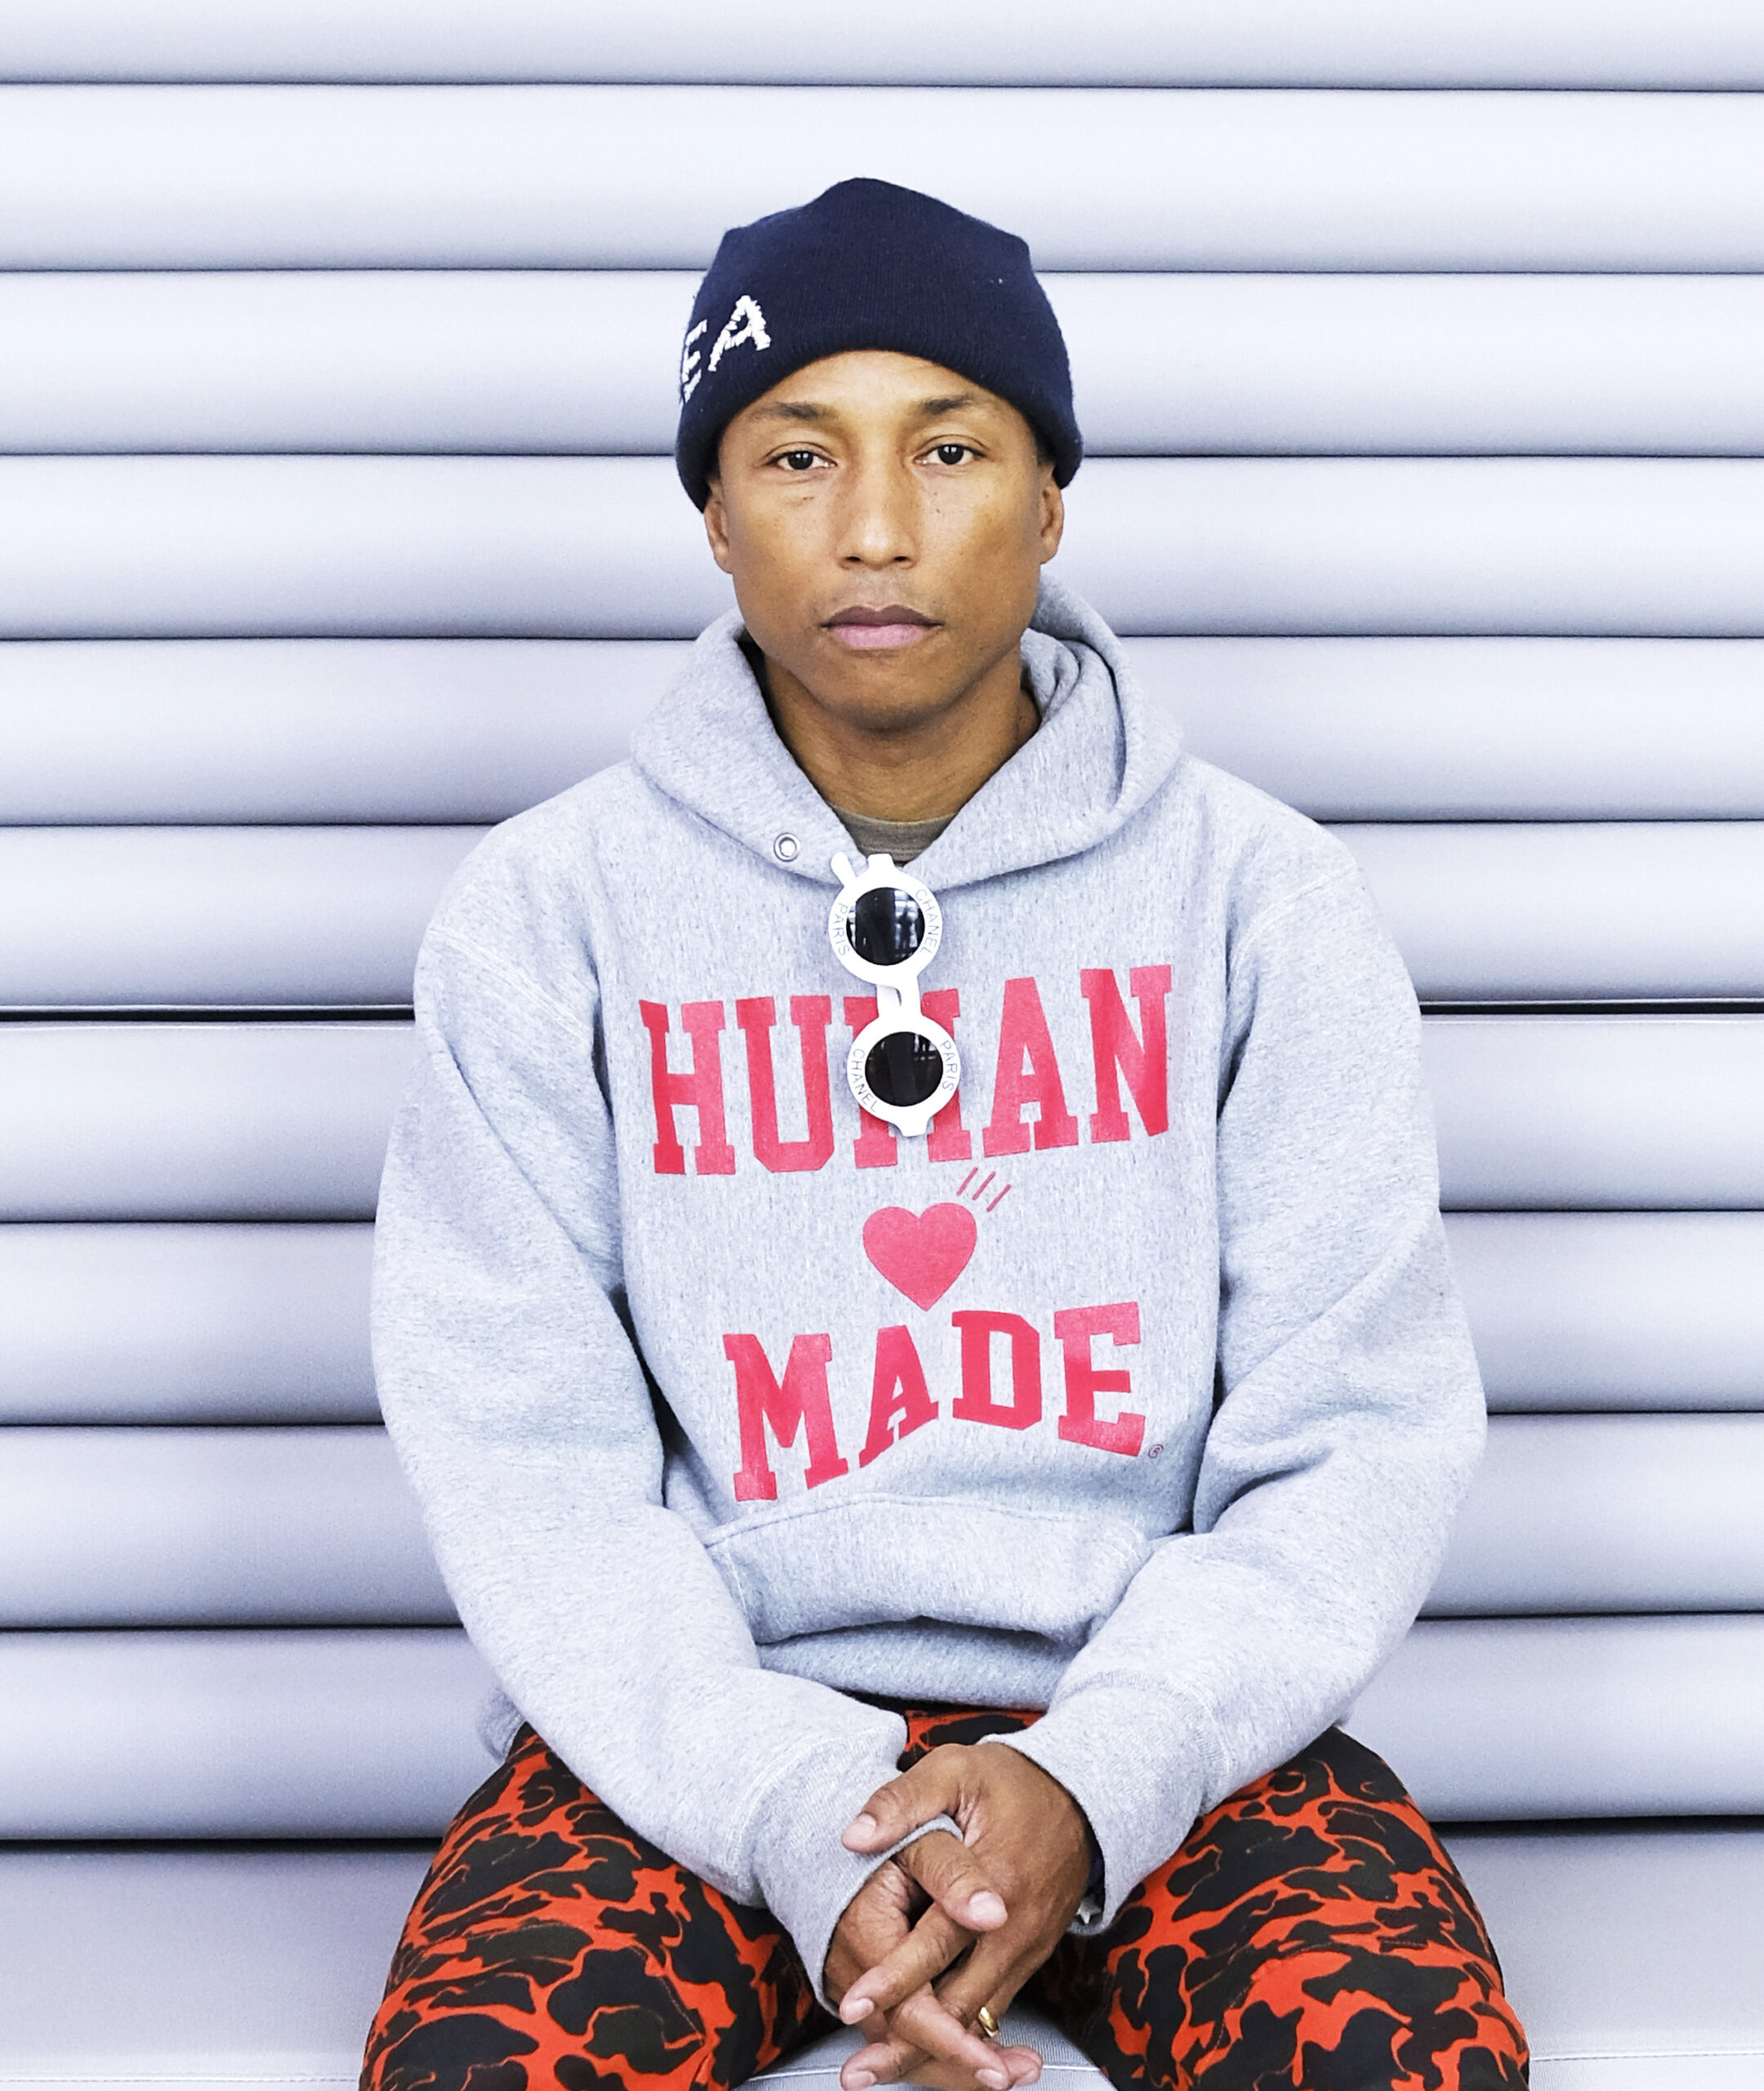 Pharrell & Louis Vuitton Accused By Fashion Designer Of Stealing Her Idea -  Streetz 94.5